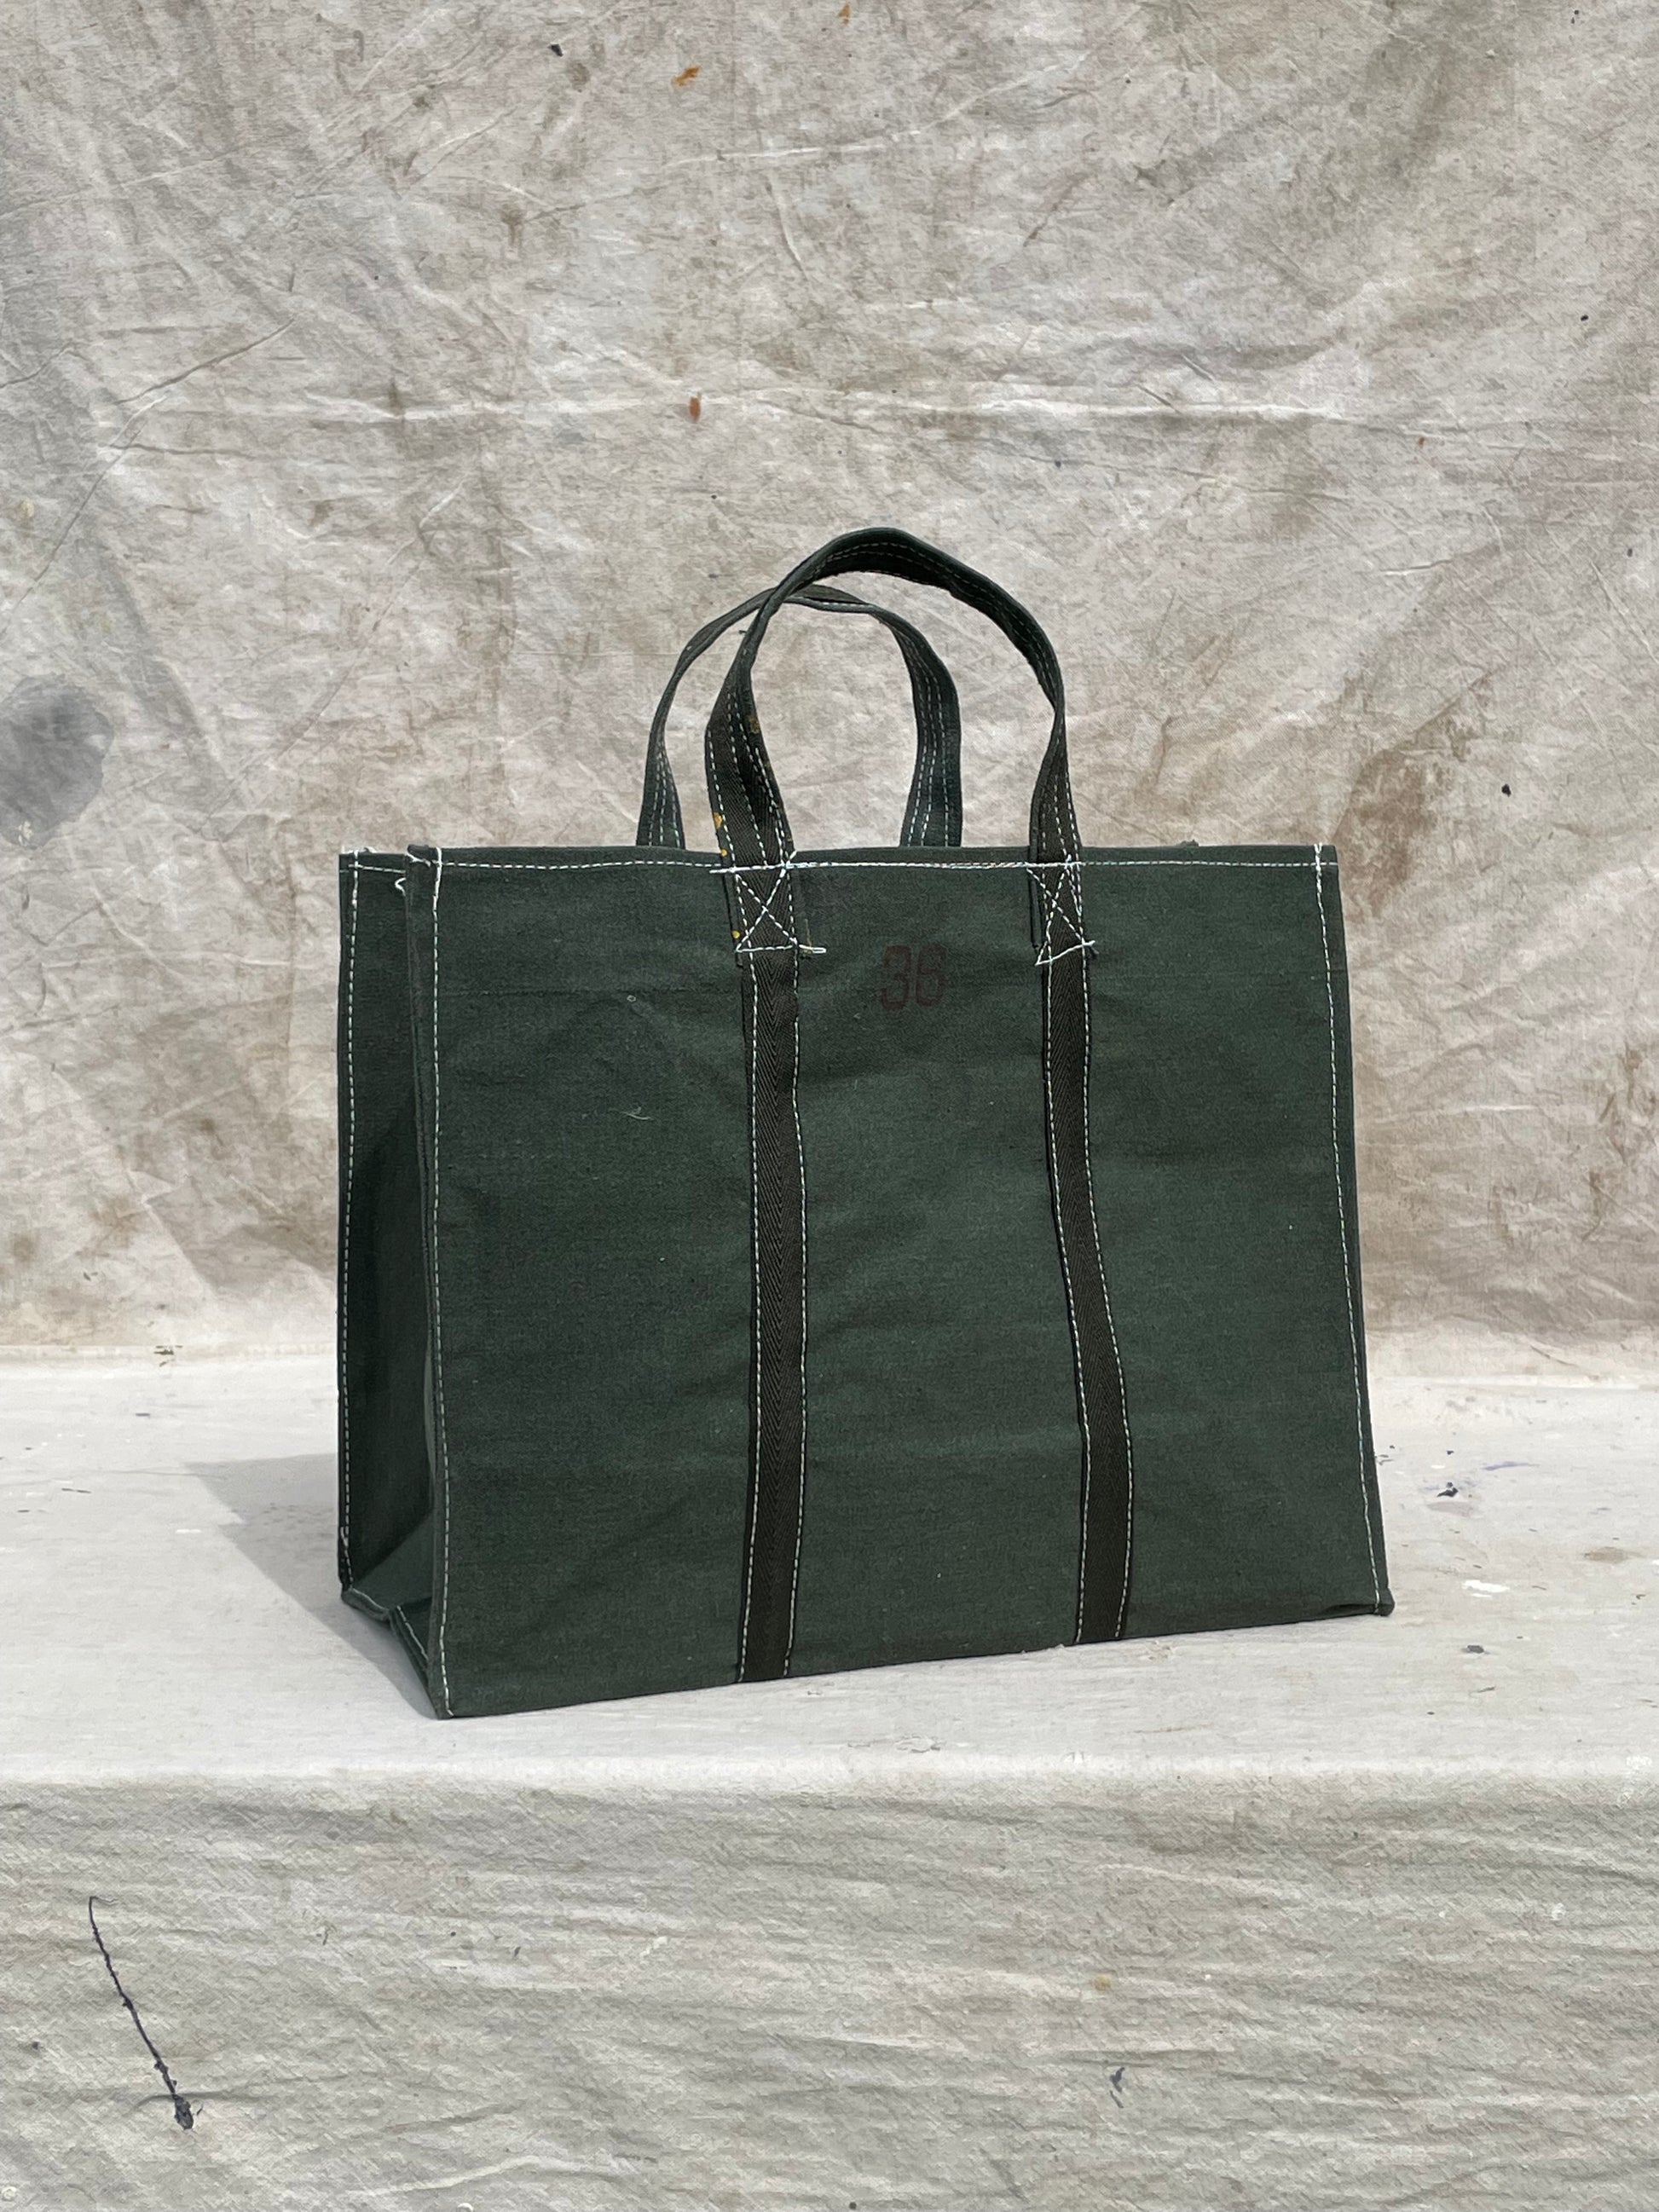 Heavy Duty and Strong Natural Canvas Tote Bags